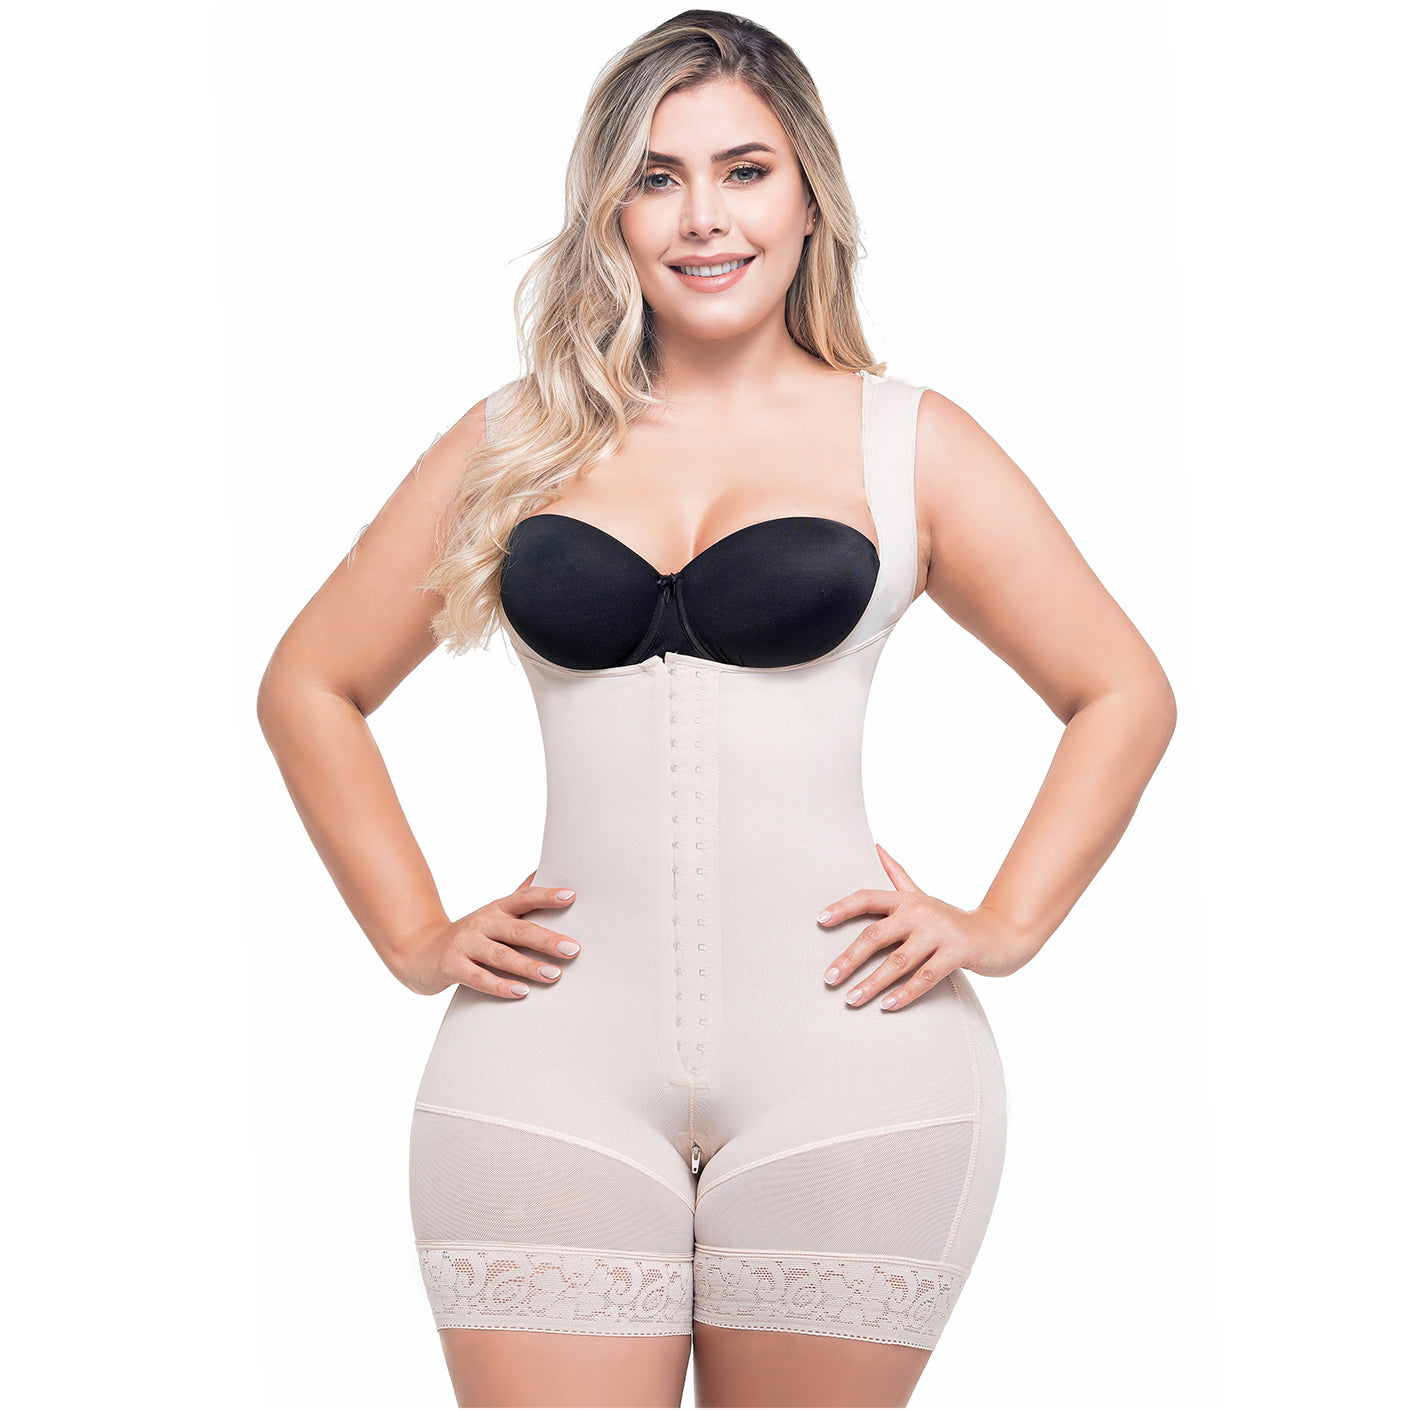  D066 Fajas Colombianas Post Surgery And Postpartum Tummy  Tuck Compression Garment For Women Beige M